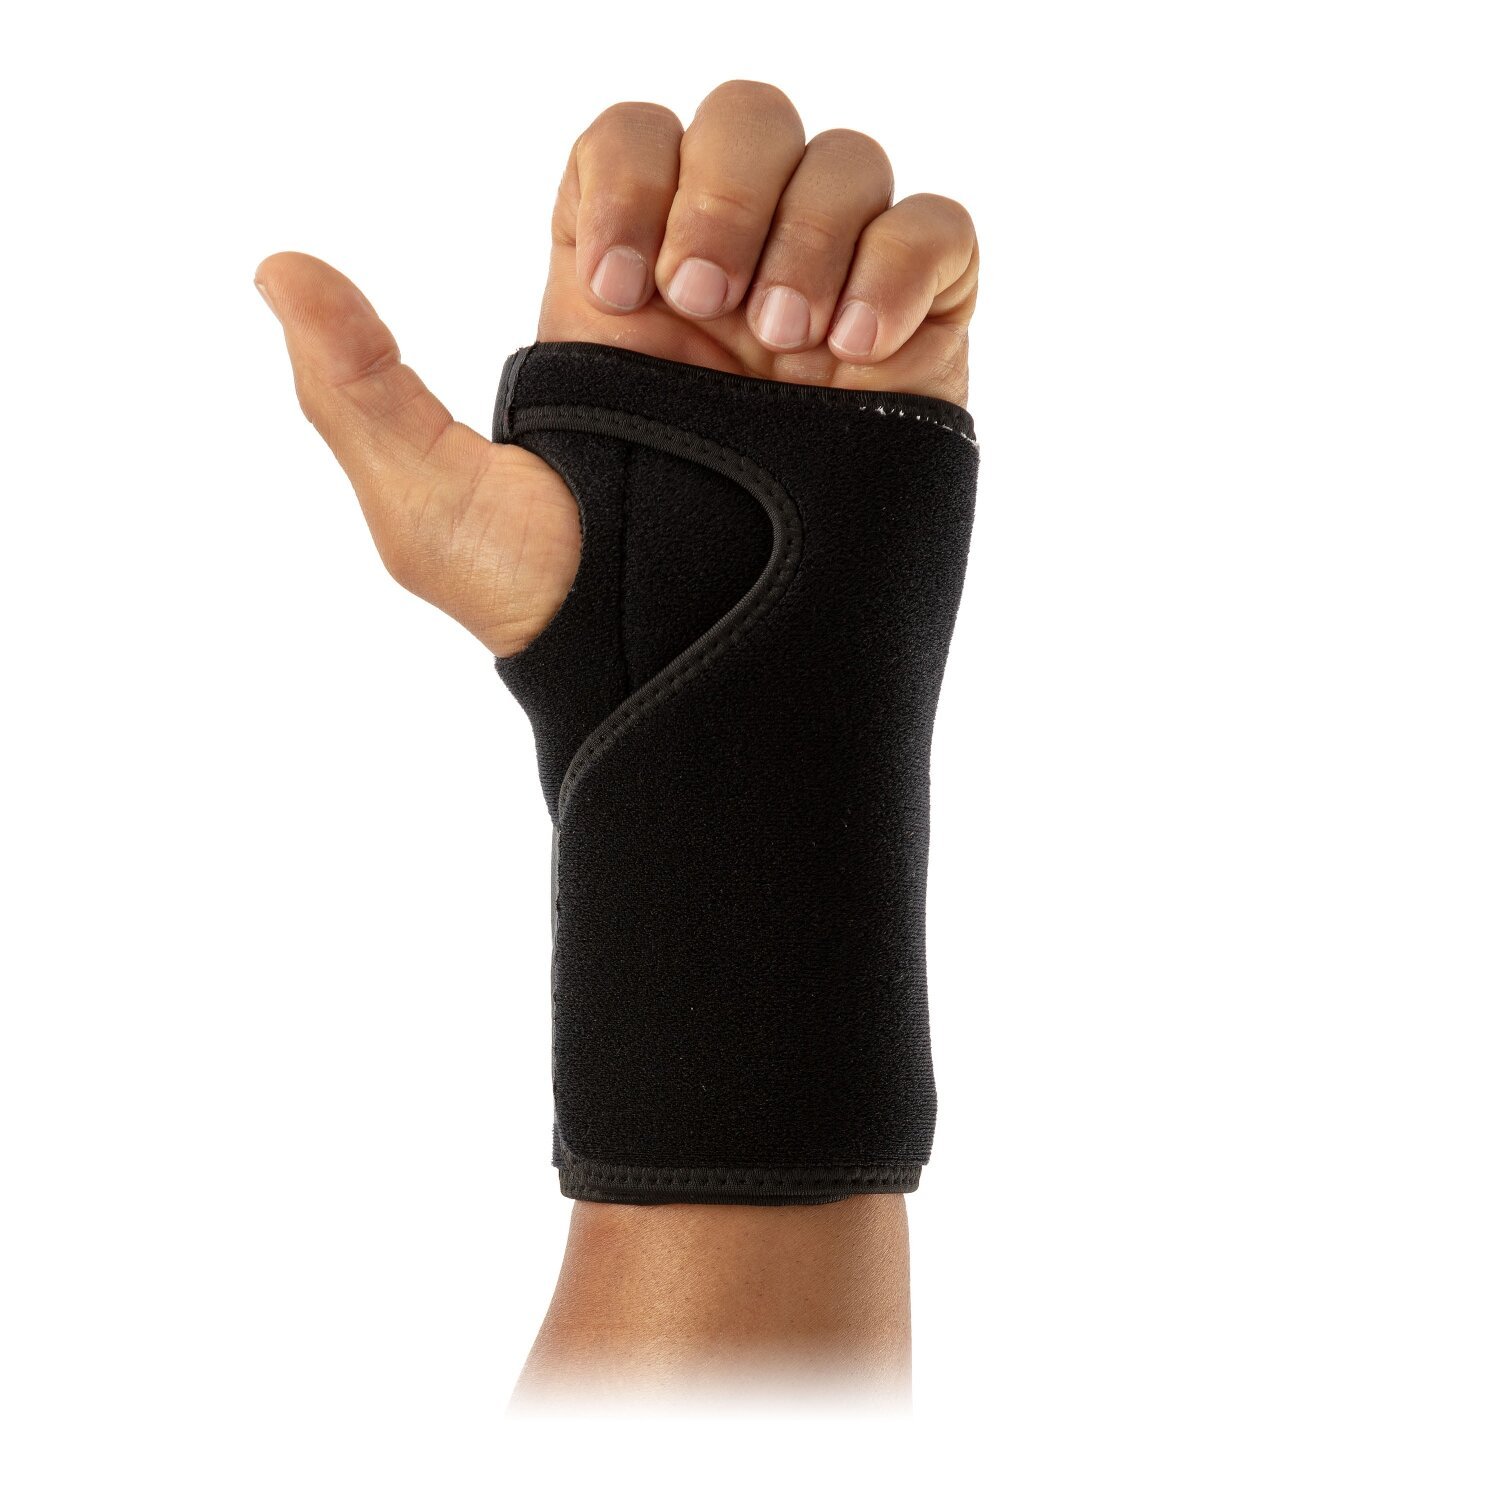 Custom Thumb Wrist Support Carpal Tunnel Wrist Brace Supplier | Adjustable, Compression Fixation | Support Strip, Breathable Mesh Fabric | For Sprain